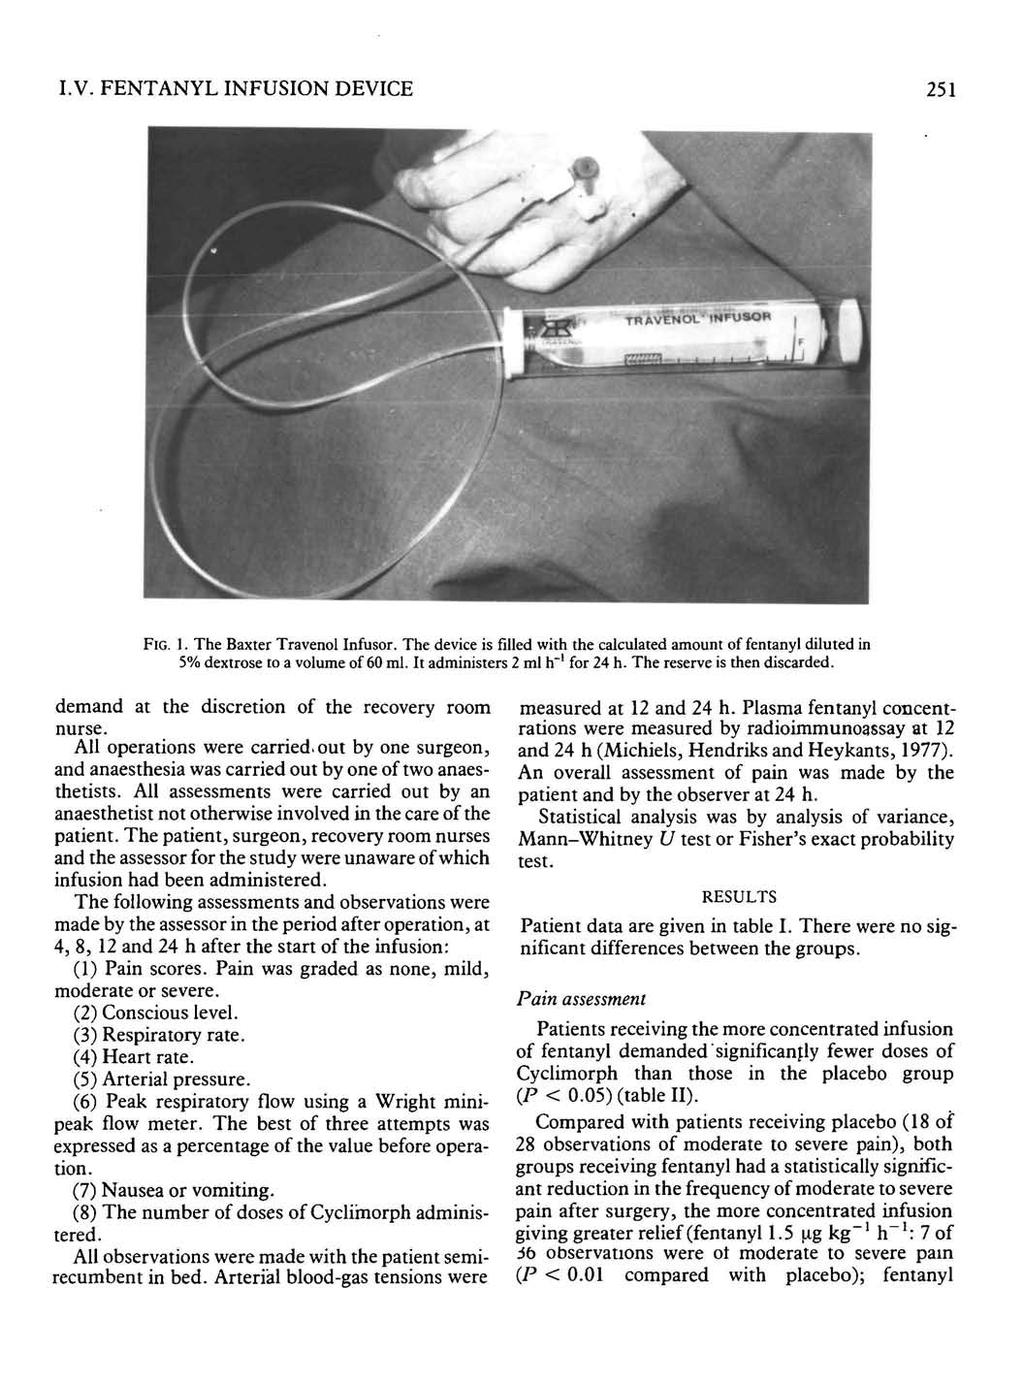 I.V. FENTANYL INFUSION DEVICE 251 FIG. 1. The Baxter Travenol Infusor. The device is filled with the calculated amount of fentanyl diluted in 5% dextrose to a volume of 60 ml.